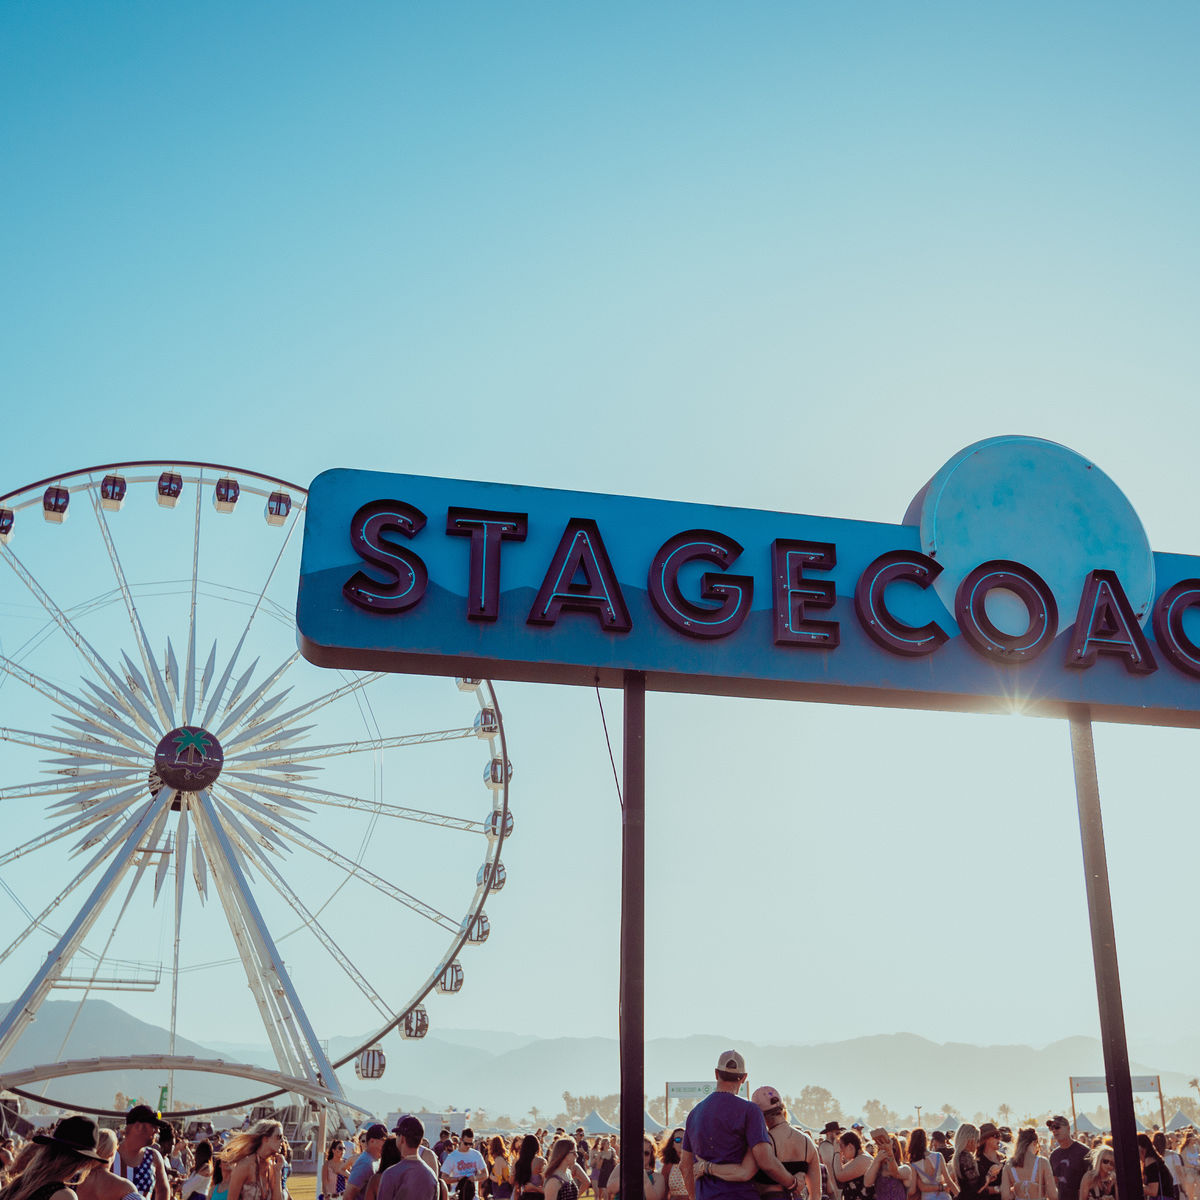 Stagecoach sign with ferris wheel in background